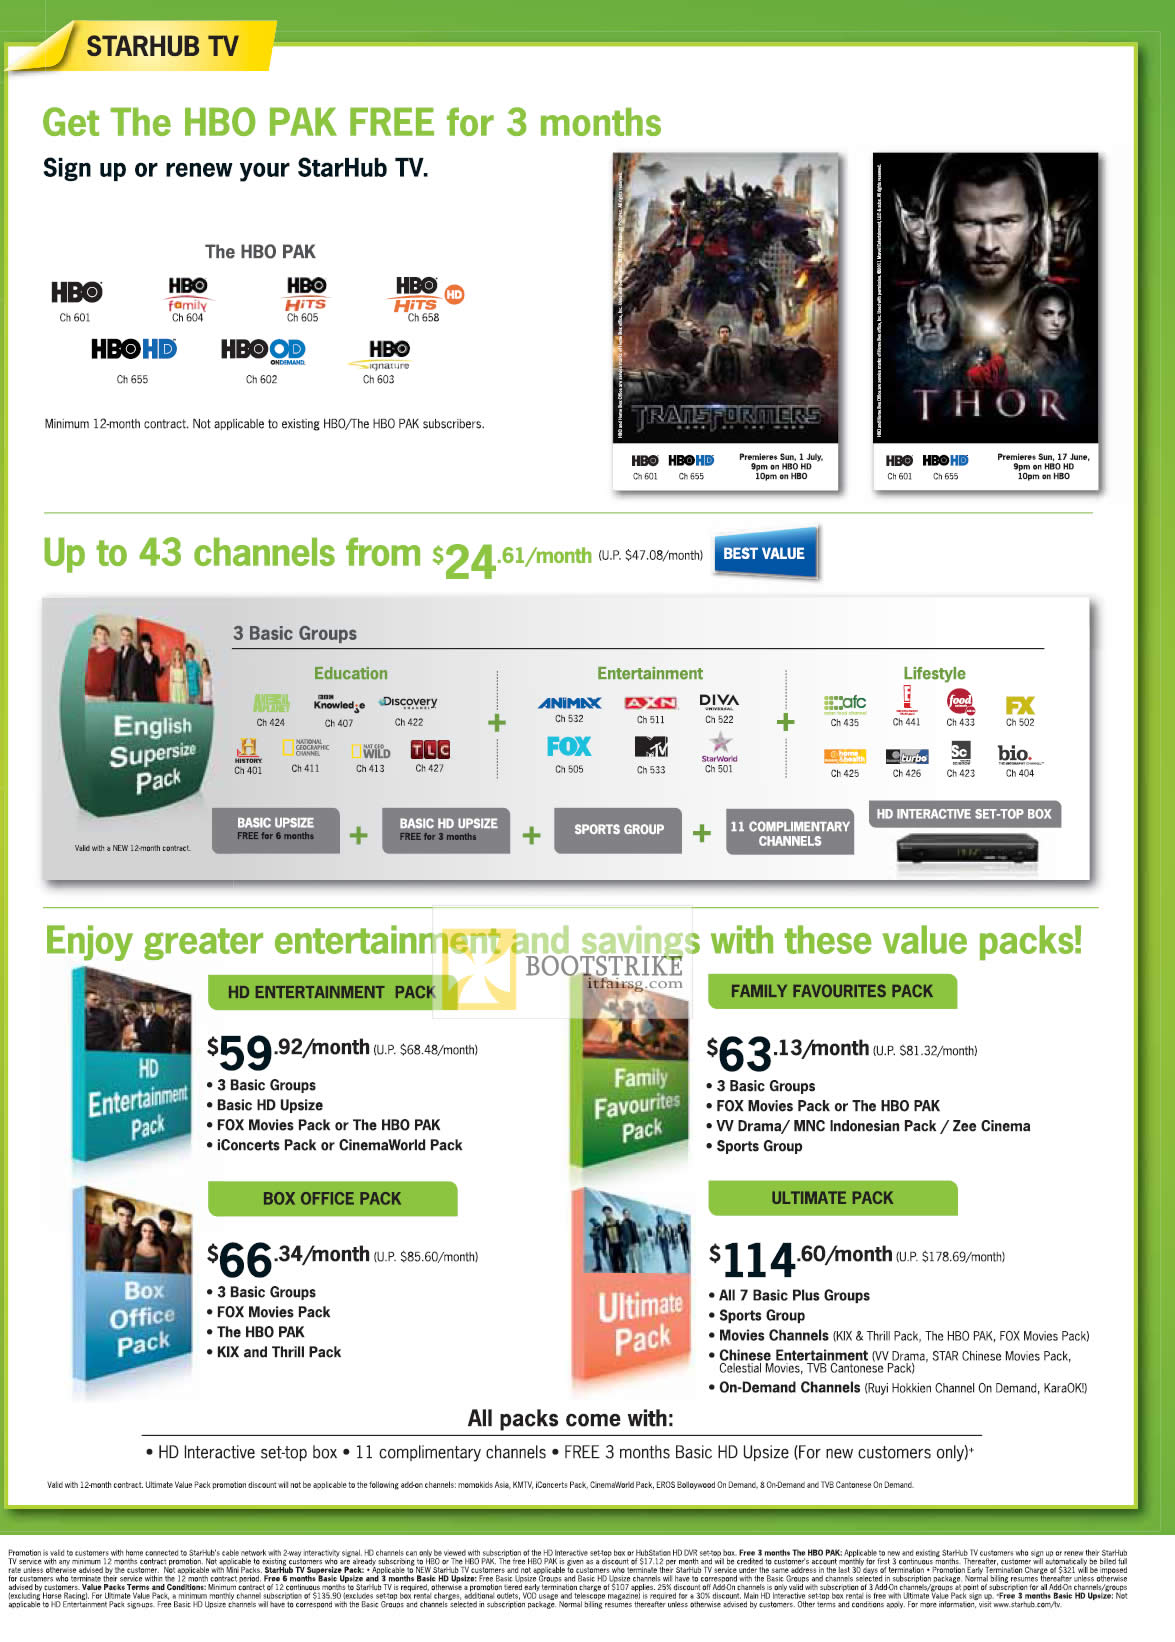 PC SHOW 2012 price list image brochure of Starhub TV HBO Pak Free, HD Entertainment Pack, Box Office Pack, Family Favourites, Ultimate